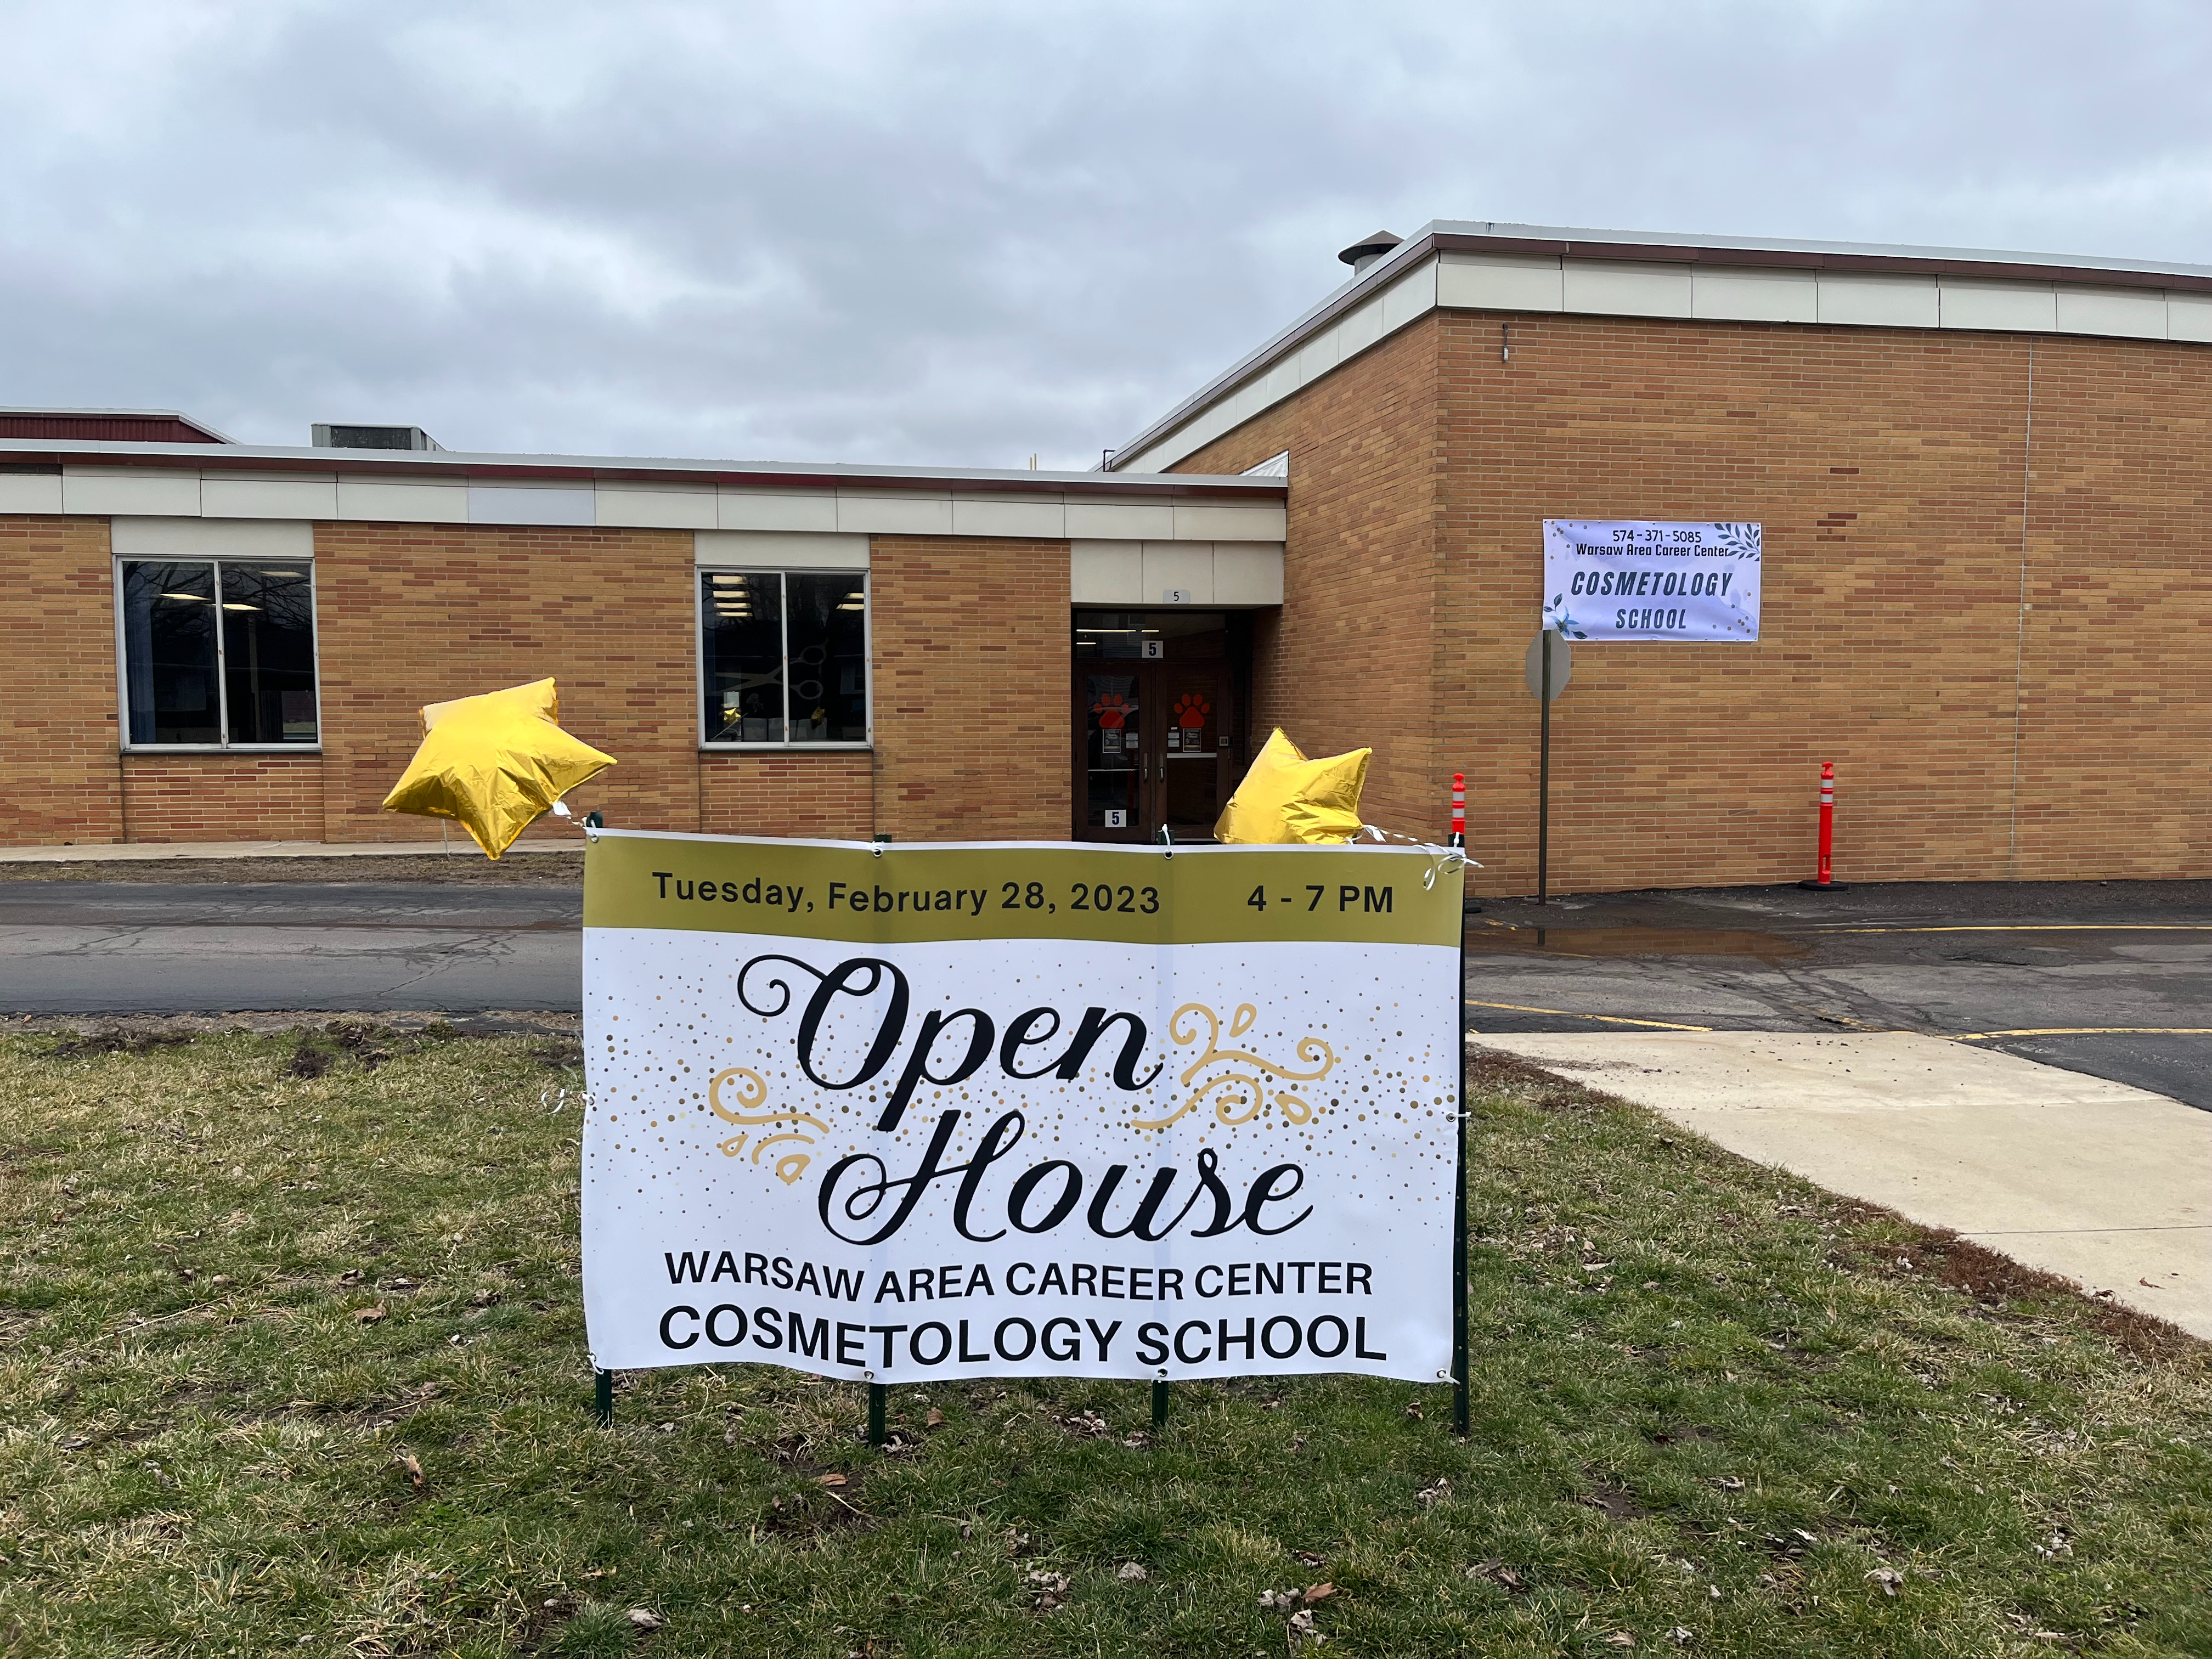 Open house banner for the warsaw area career center cosmetology school Tuesday, February 28th 2023 from 4-7pm. Banner is in the grass outside of the school entrance